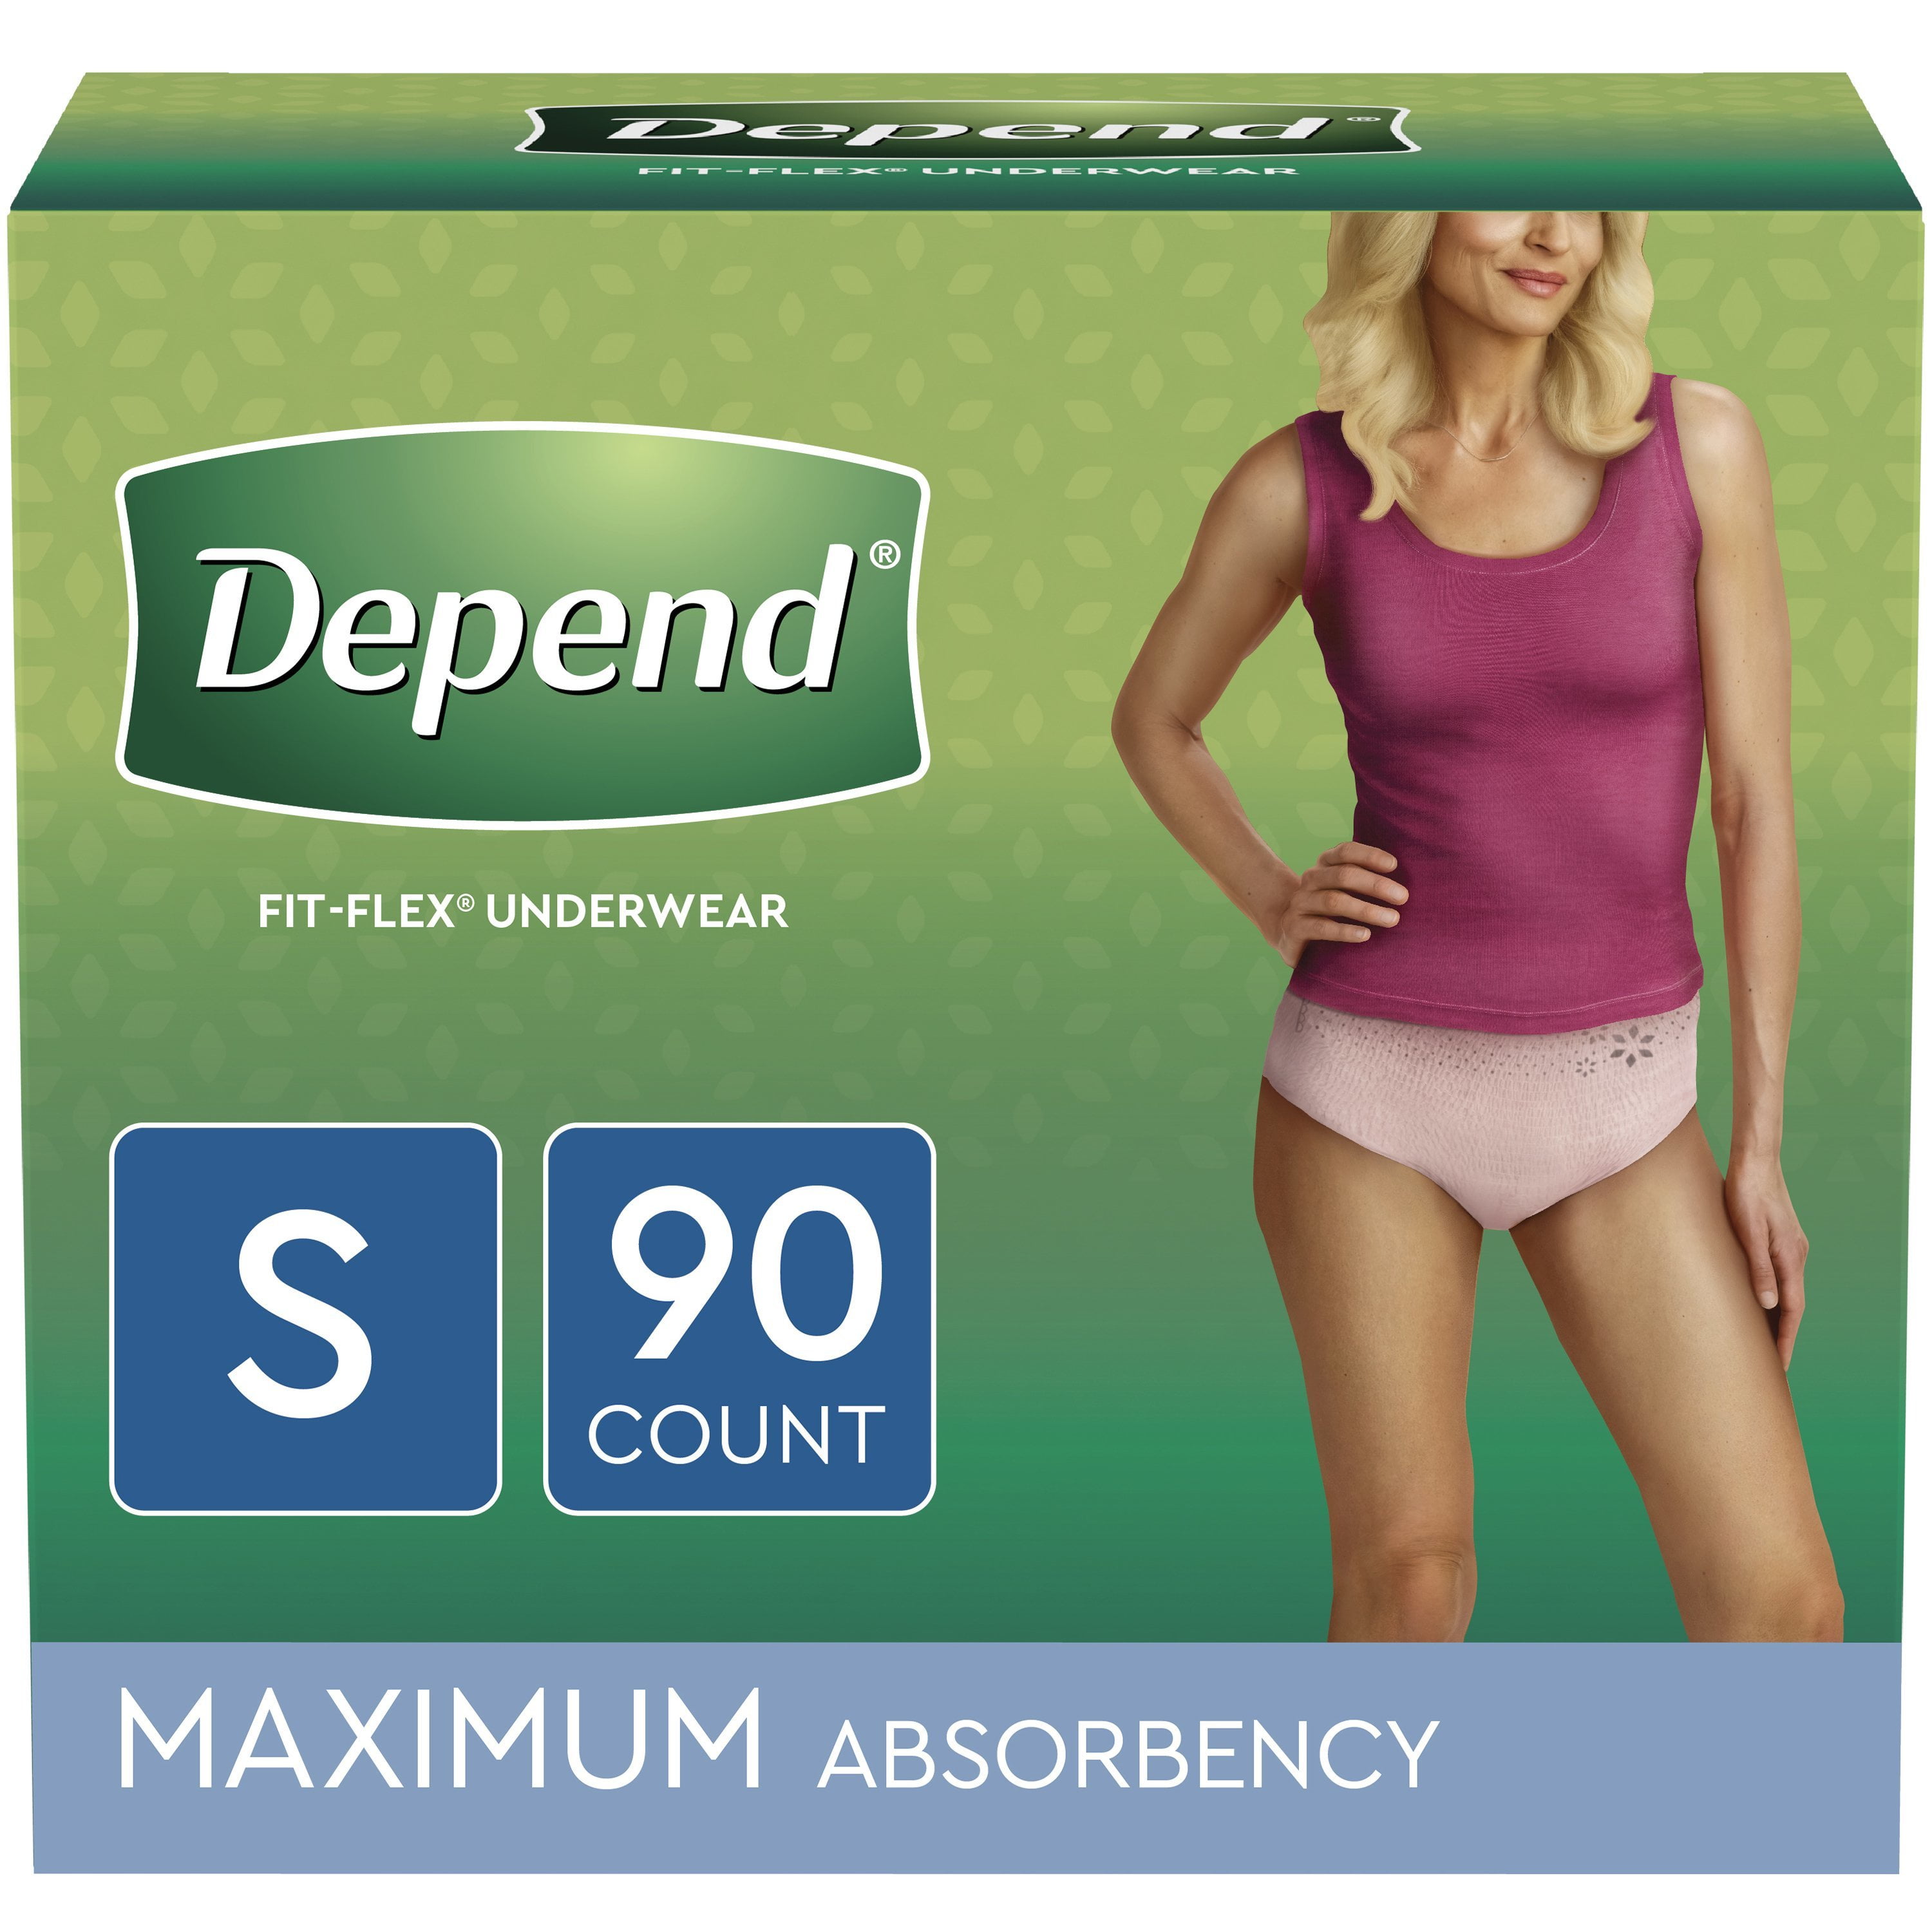 Depend Fit-Flex Incontinence Underwear for Women, Maximum Absorbency,  Small, Light Pink, 90 Count (3 Packs of 30)